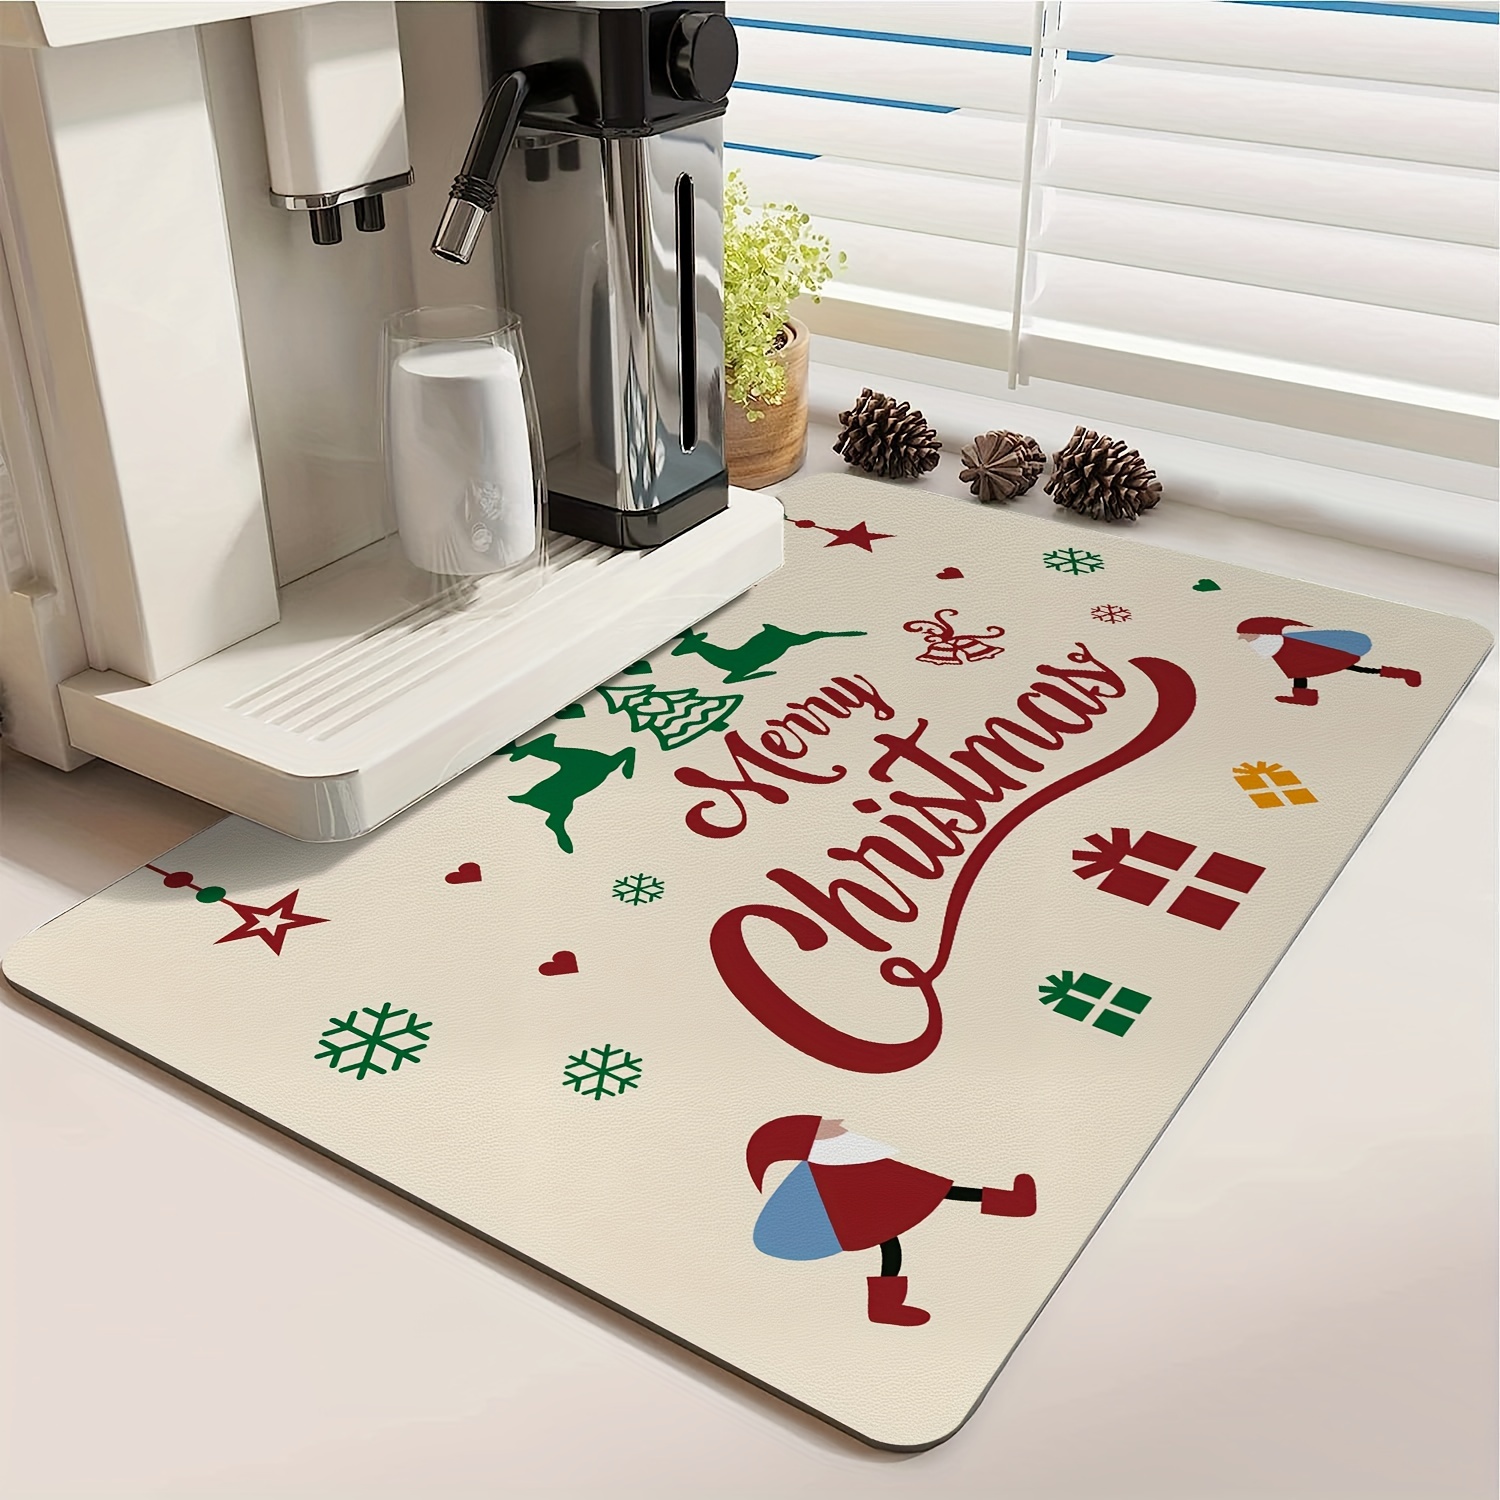 1pc Christmas Coffee Bar Mat, Dish Drying Mat , Absorbent Coffee Maker Mat  For CountertopsHide Stains, Fit For Under Espresso Machine/Coffee Pot/DishRack/Kitchen/  Christmas Decor Christmas Decor, Coffee Mat - Hide Stain Absorbent